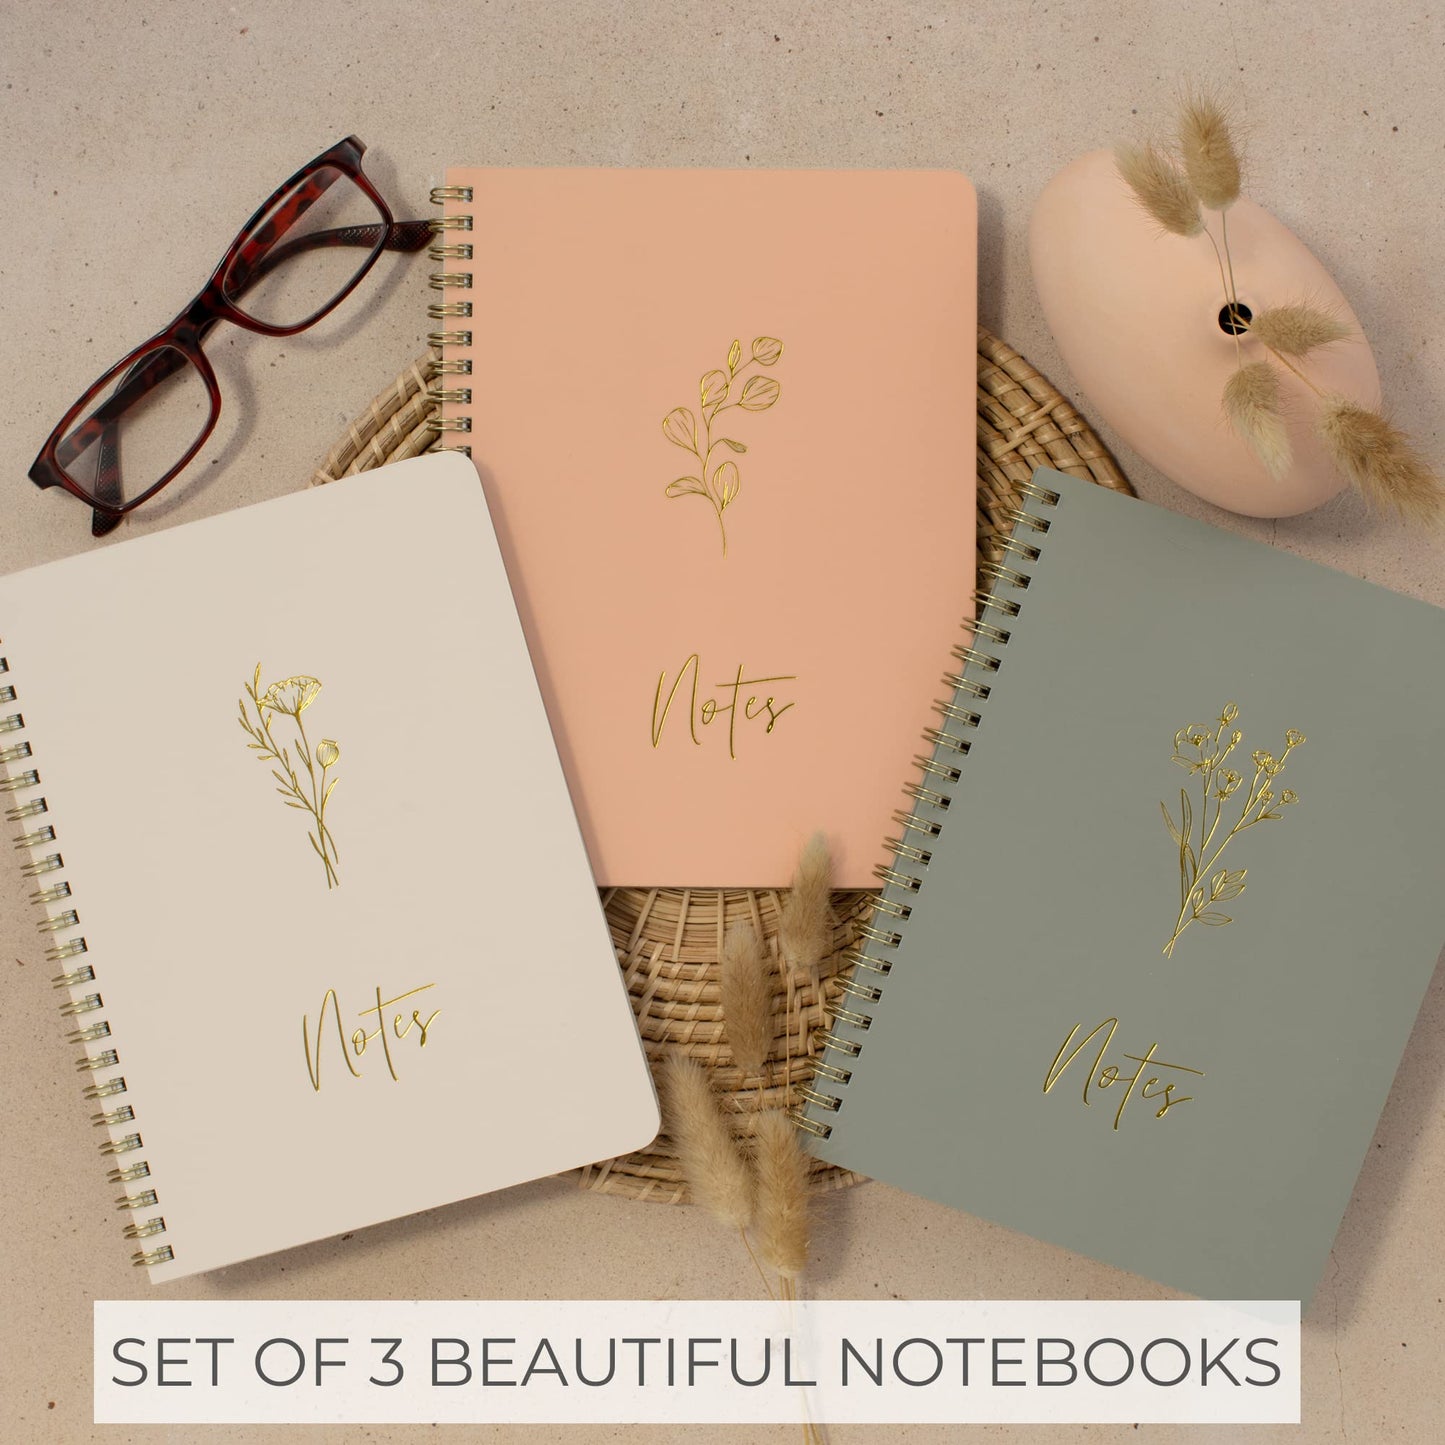 ZICOTO Aesthetic Spiral Notebook Set of 3 For Women - Cute College Ruled 8x6 Journal/Notebook with Large Pockets And Lined Pages - Perfect Supplies to Stay Organized at Work or School